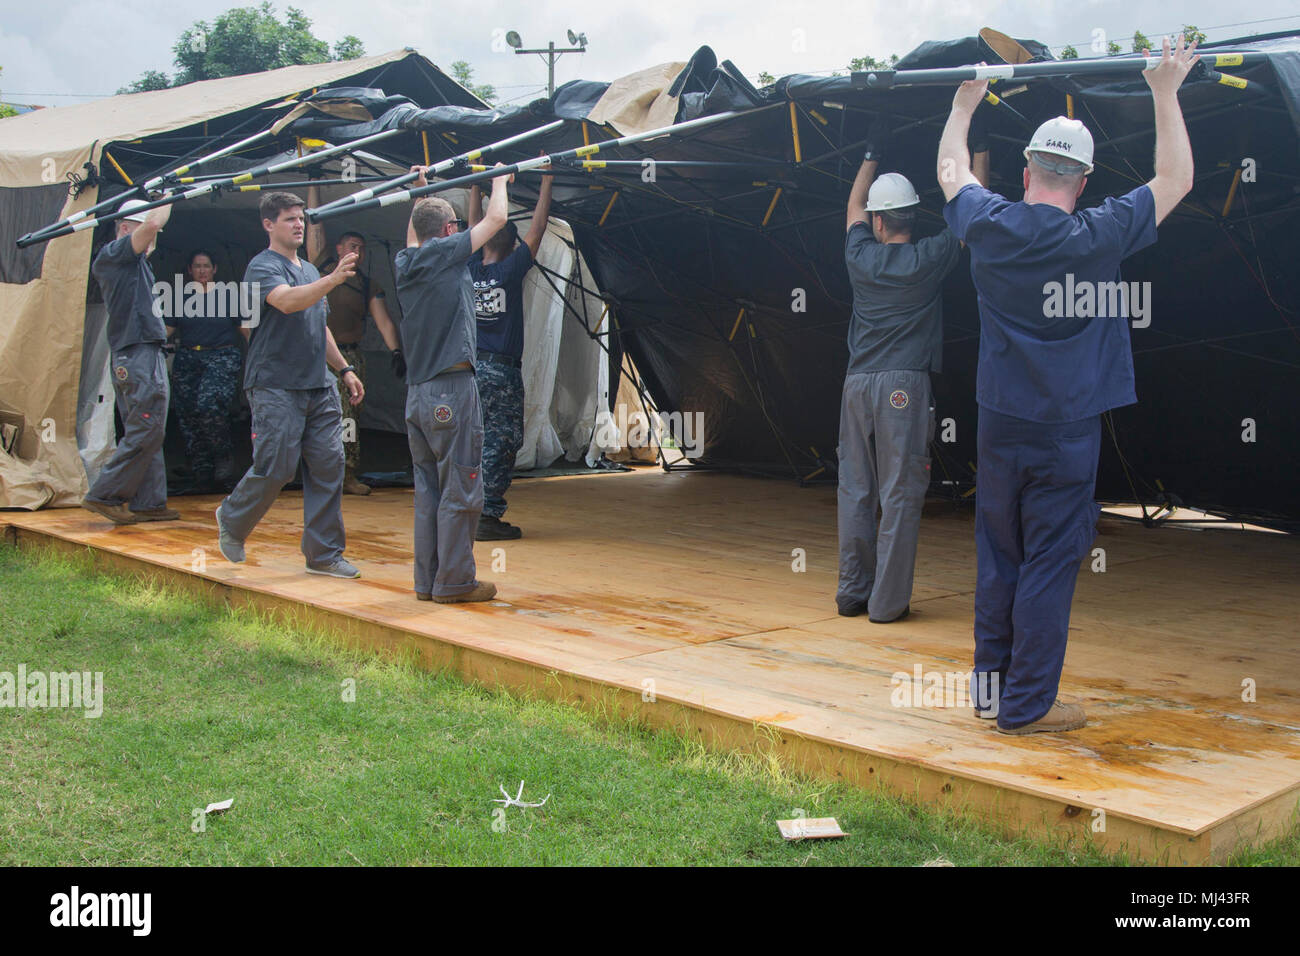 PUERTO CORTES, Honduras (March 23, 2018) Sailors disassemble a tent in preparation for departure from Honduras at the Franklin D. Roosevelt School during Continuing Promise 2018. U.S. Naval Forces Southern Command/U.S. 4th Fleet has deployed a force to execute Continuing Promise to conduct civil-military operations including humanitarian assistance, training engagements, and medical, dental, and veterinary support in an effort to show U.S. support and commitment to Central and South America. (U.S. Army Image collection celebrating the bravery dedication commitment and sacrifice of U.S. Armed F Stock Photo